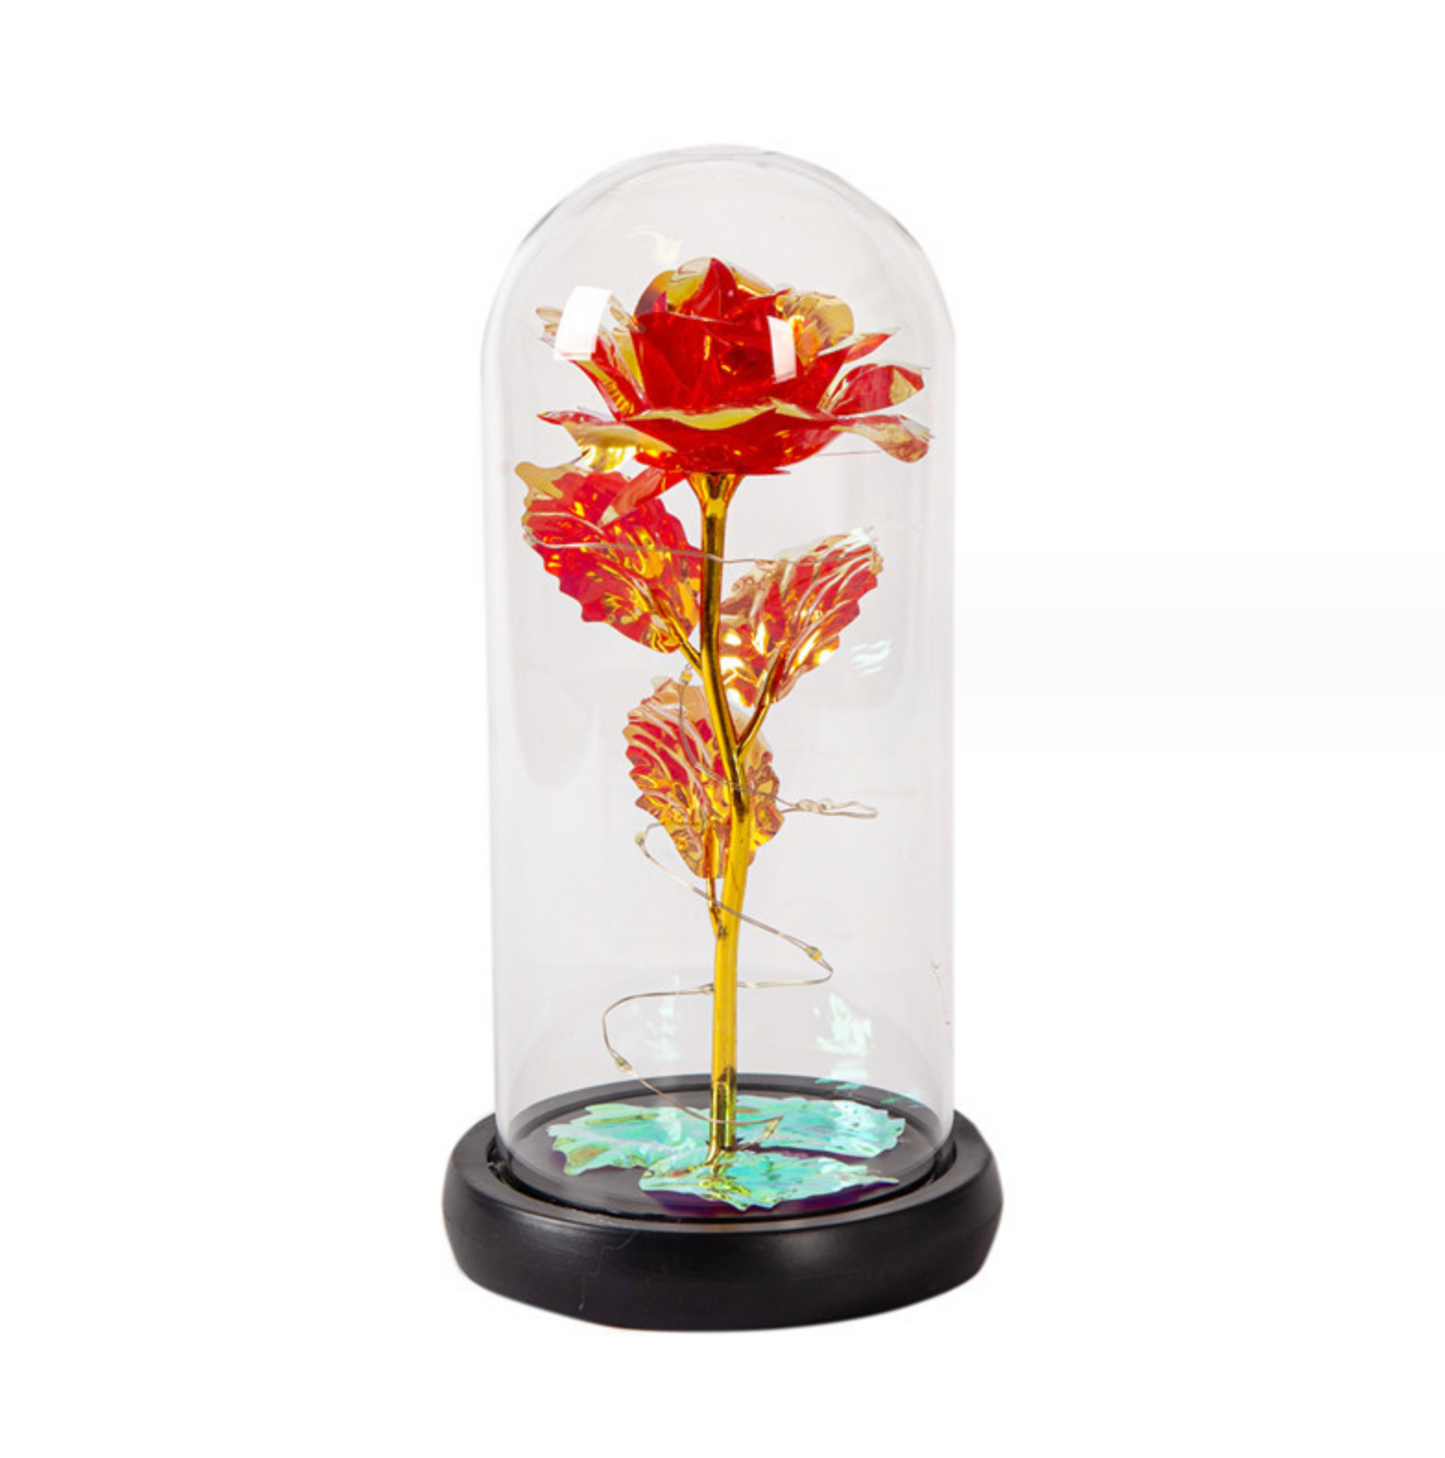 Galaxy Flowers In Glass Dome with Leaves